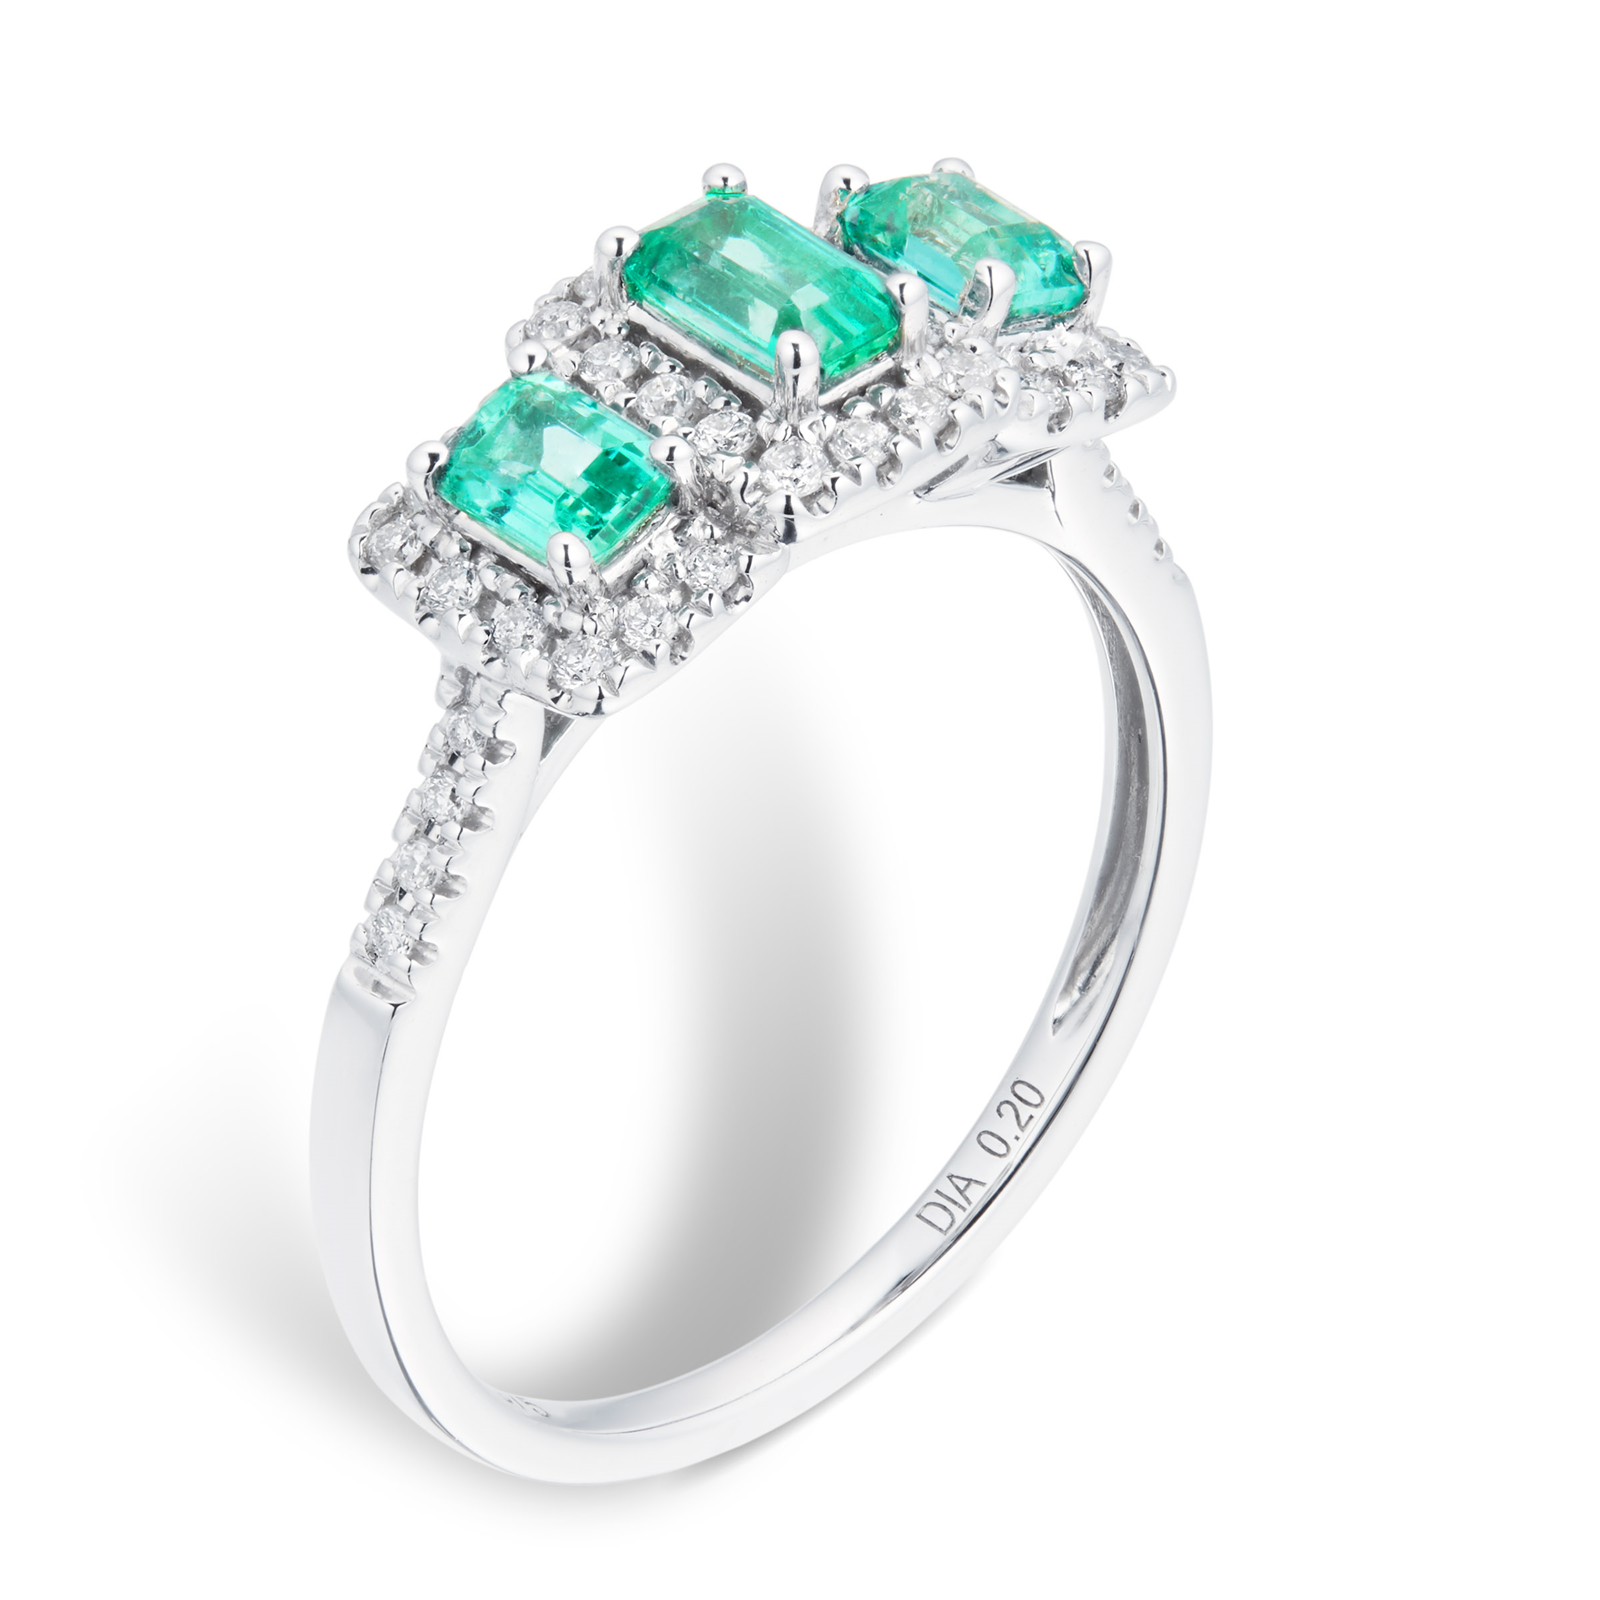 Emerald and Diamond Three Stone Ring in 9ct White Gold | Rings ...